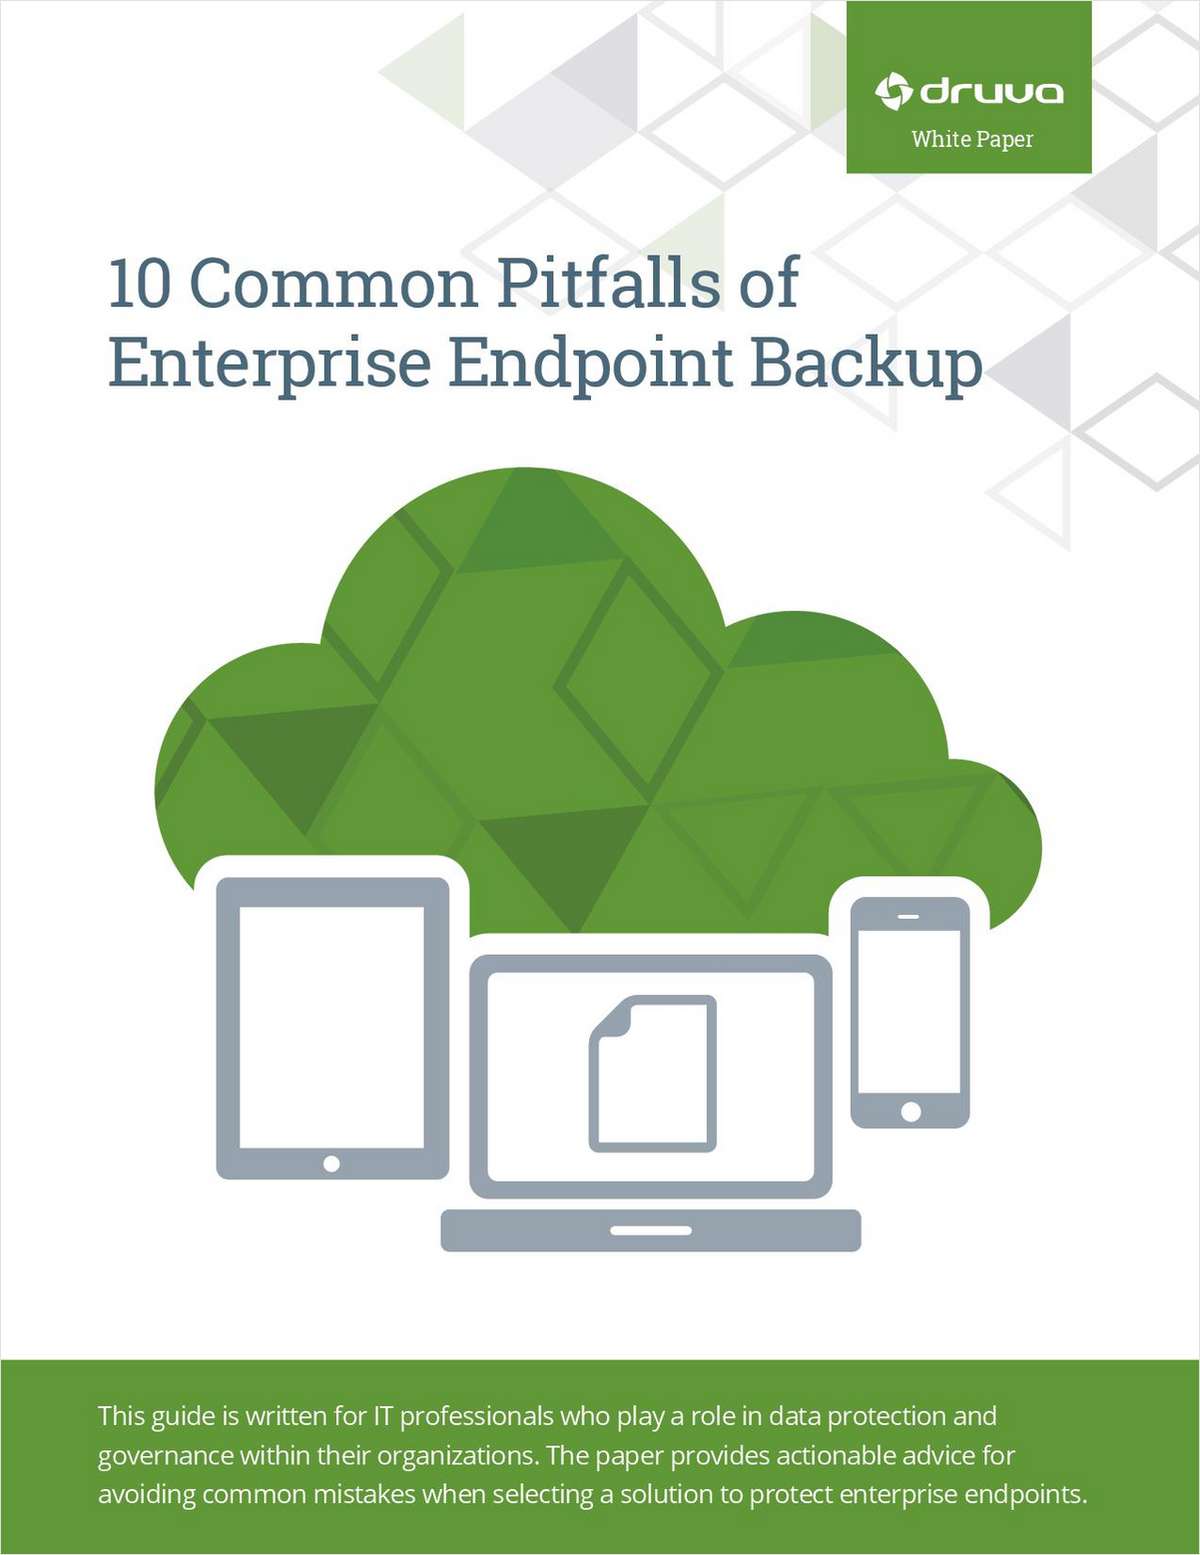 10 Common Pitfalls of Successful Enterprise Endpoint Backup